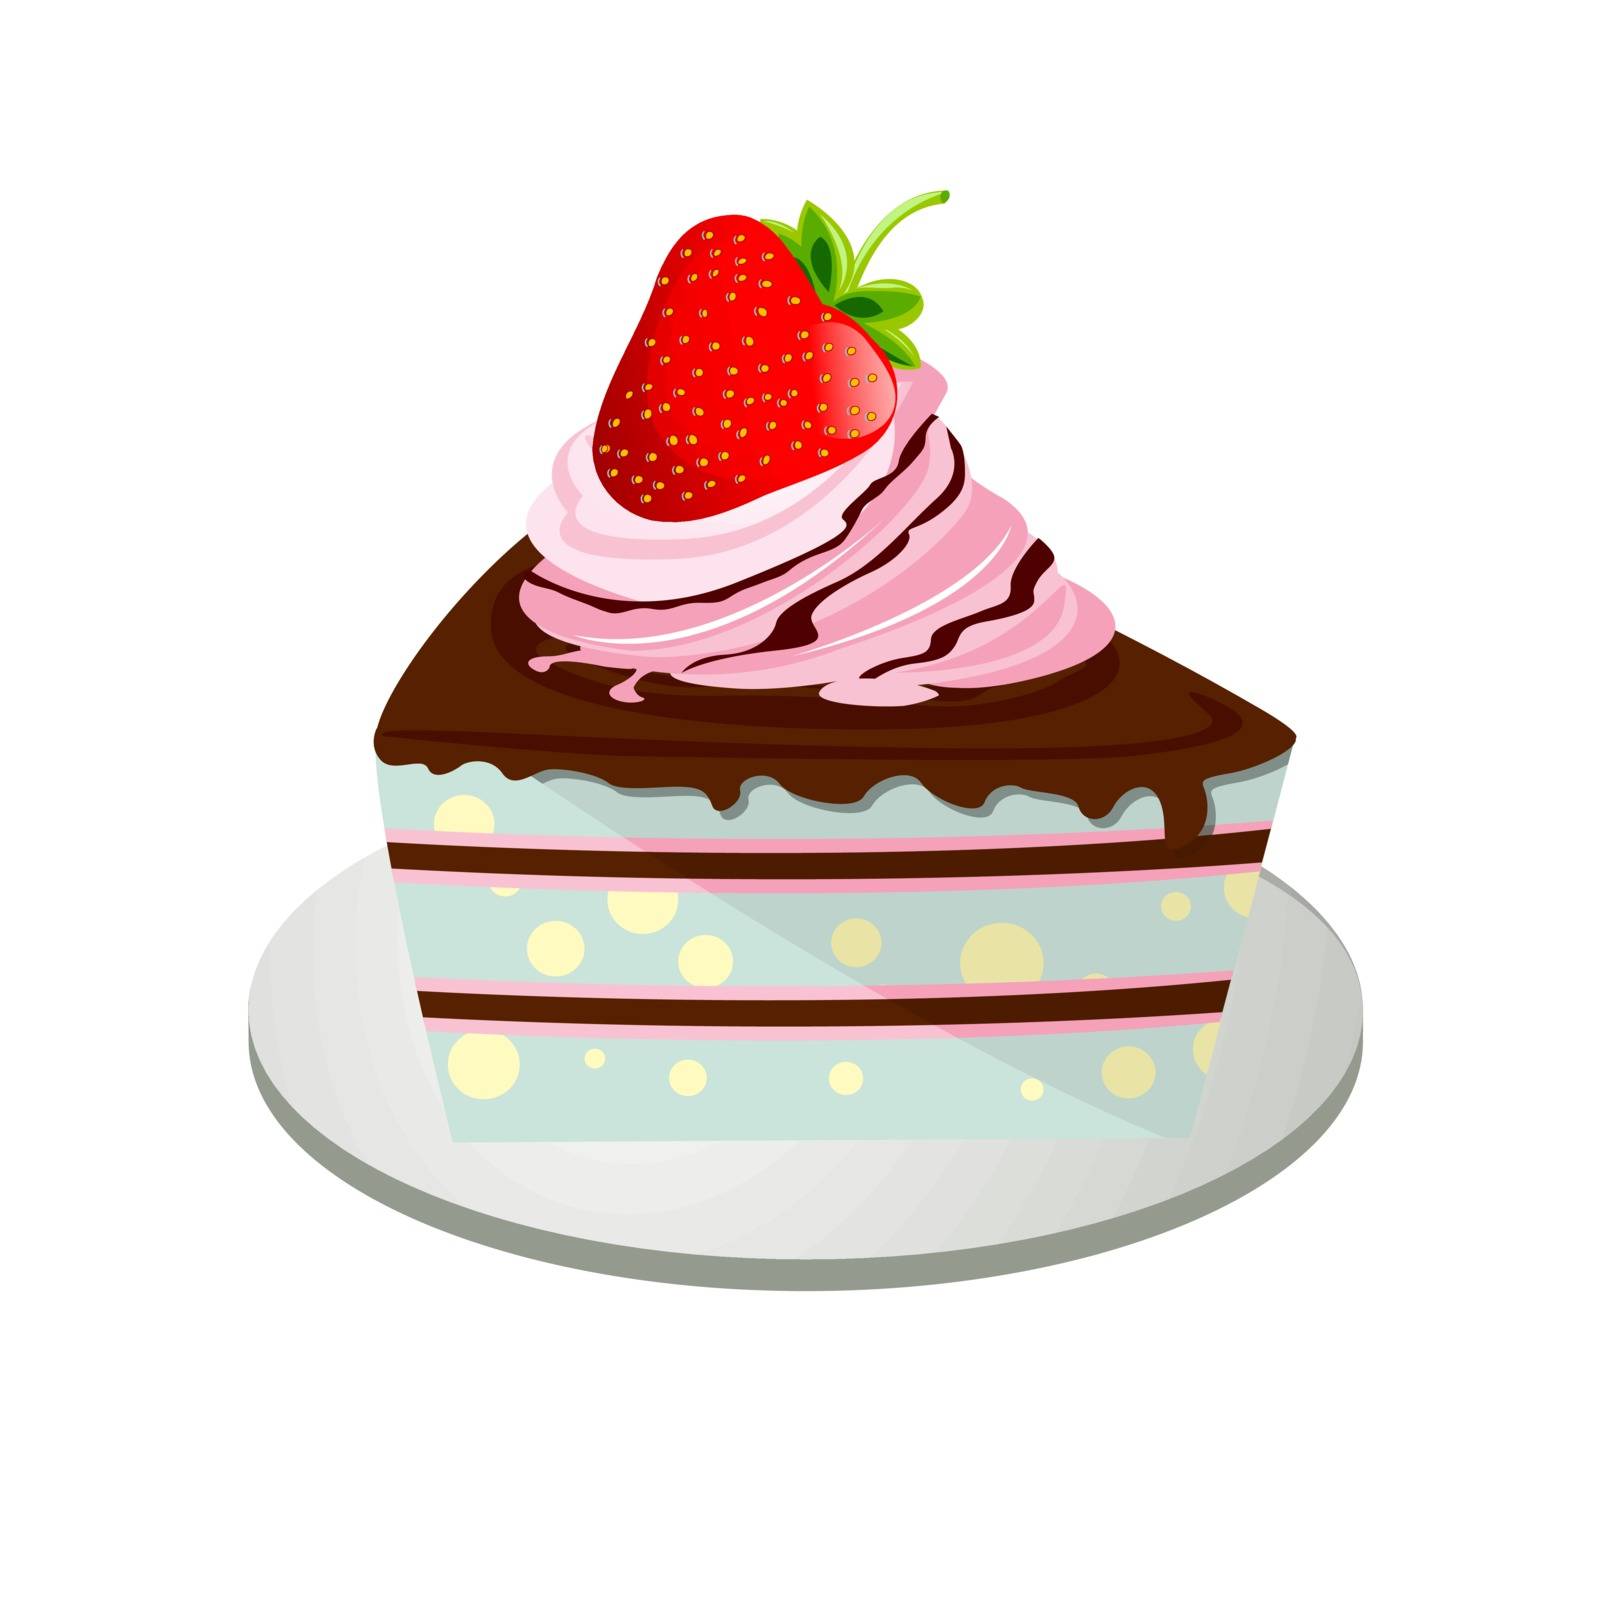 illustration of a cake with strawberry and chocolate